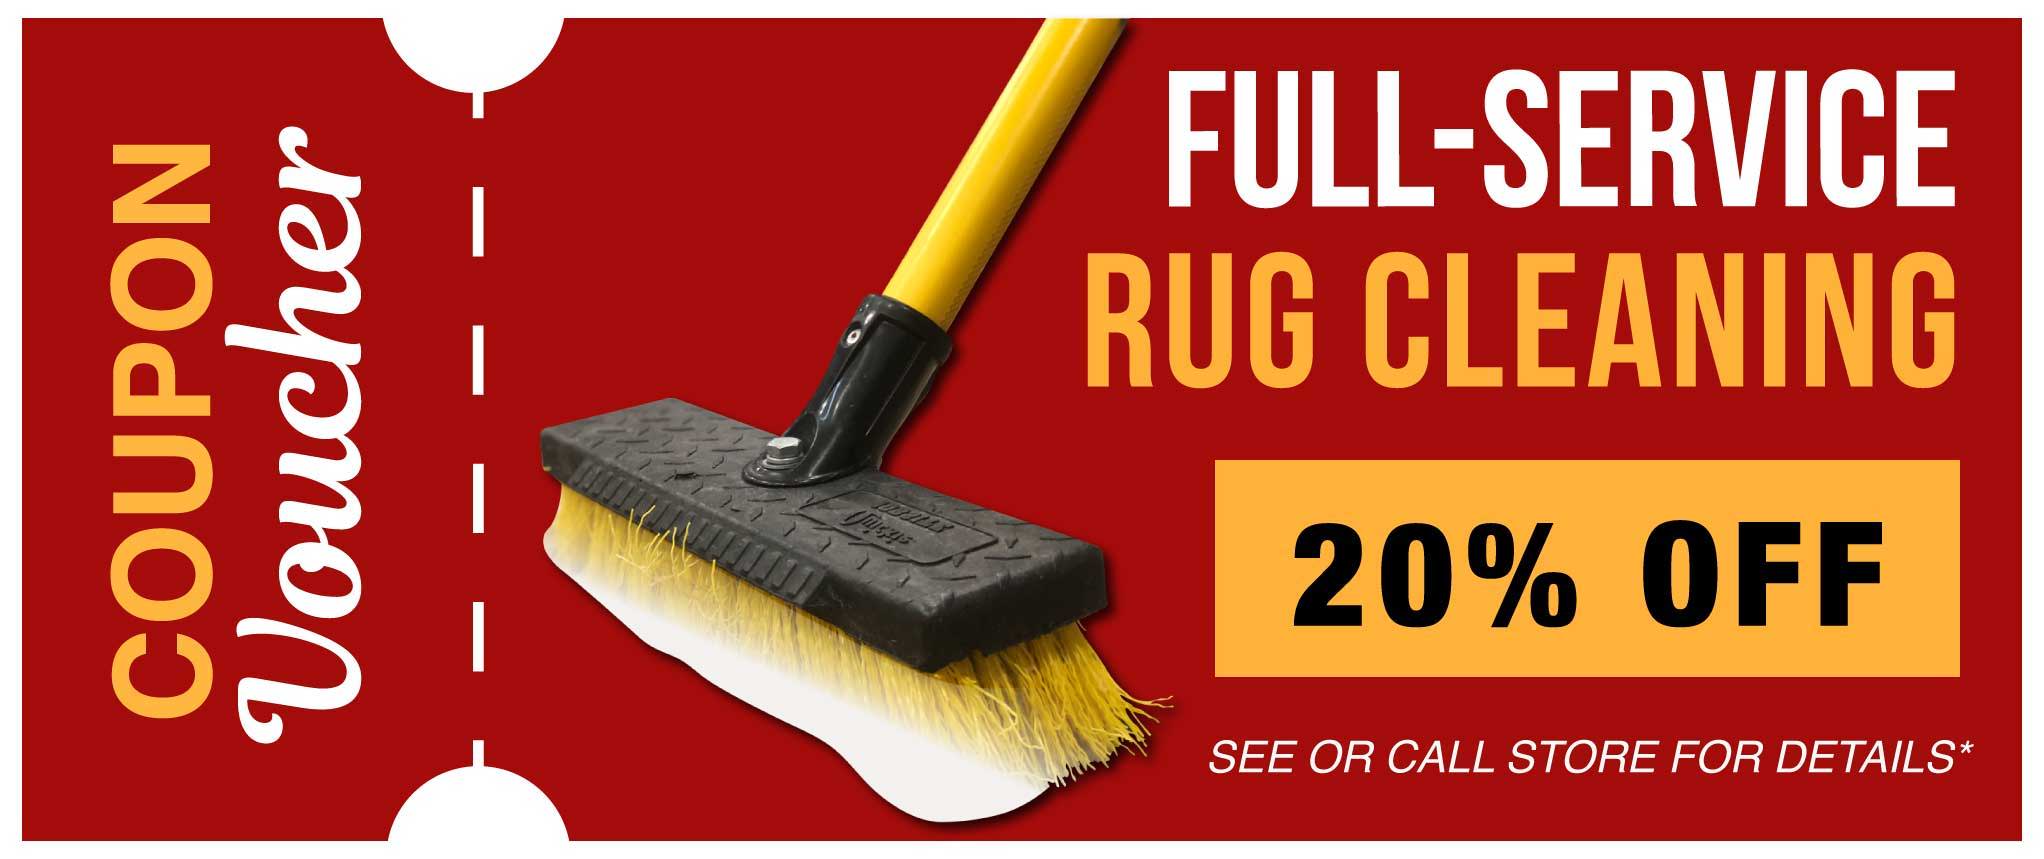 20% off full-service rug cleaning  coupon from Kaoud Rugs and Carpet